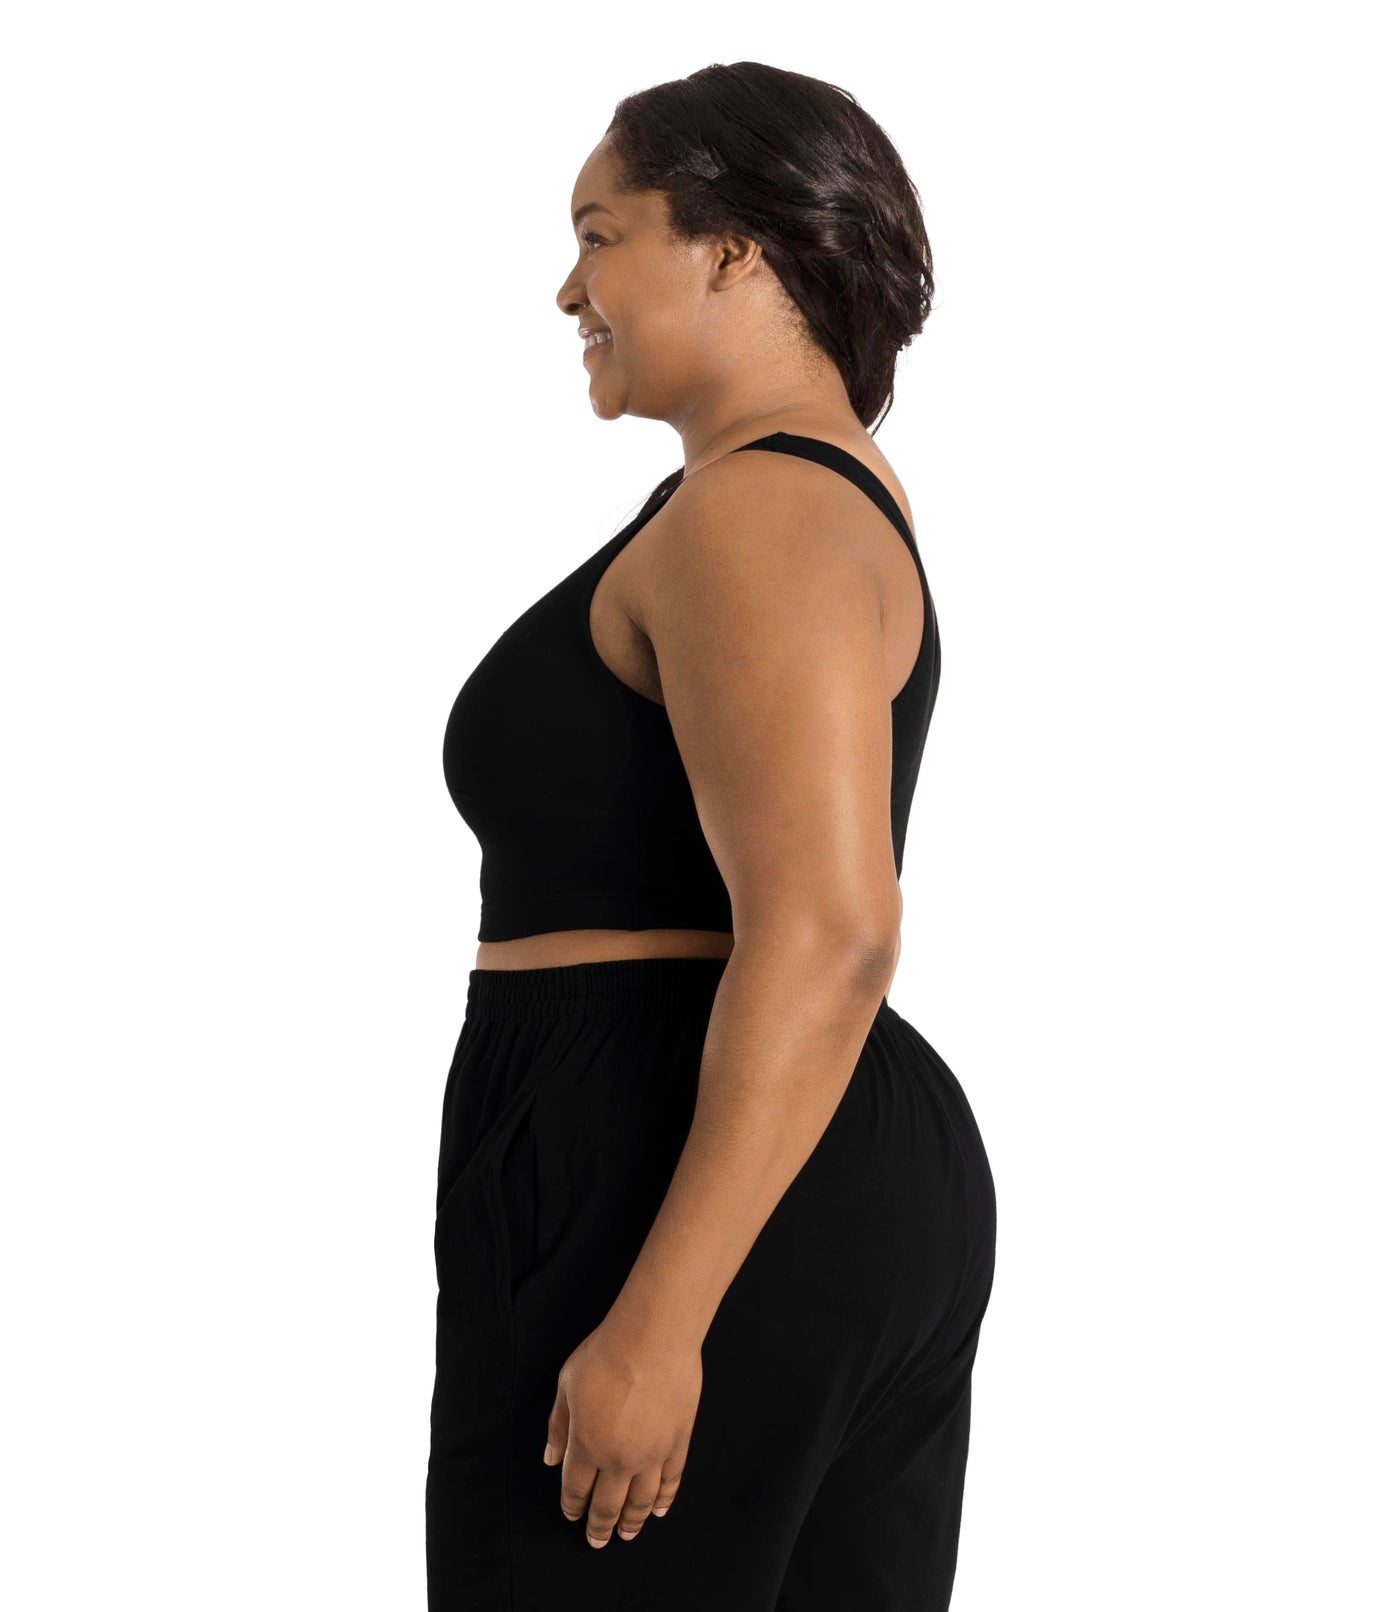 Plus size woman, facing side profile, wearing JunoActive plus size Stretch Naturals Scoop Neck Bra in black. The woman is wearing black JunoActive plus size bottoms. Her arms fall naturally to her side.